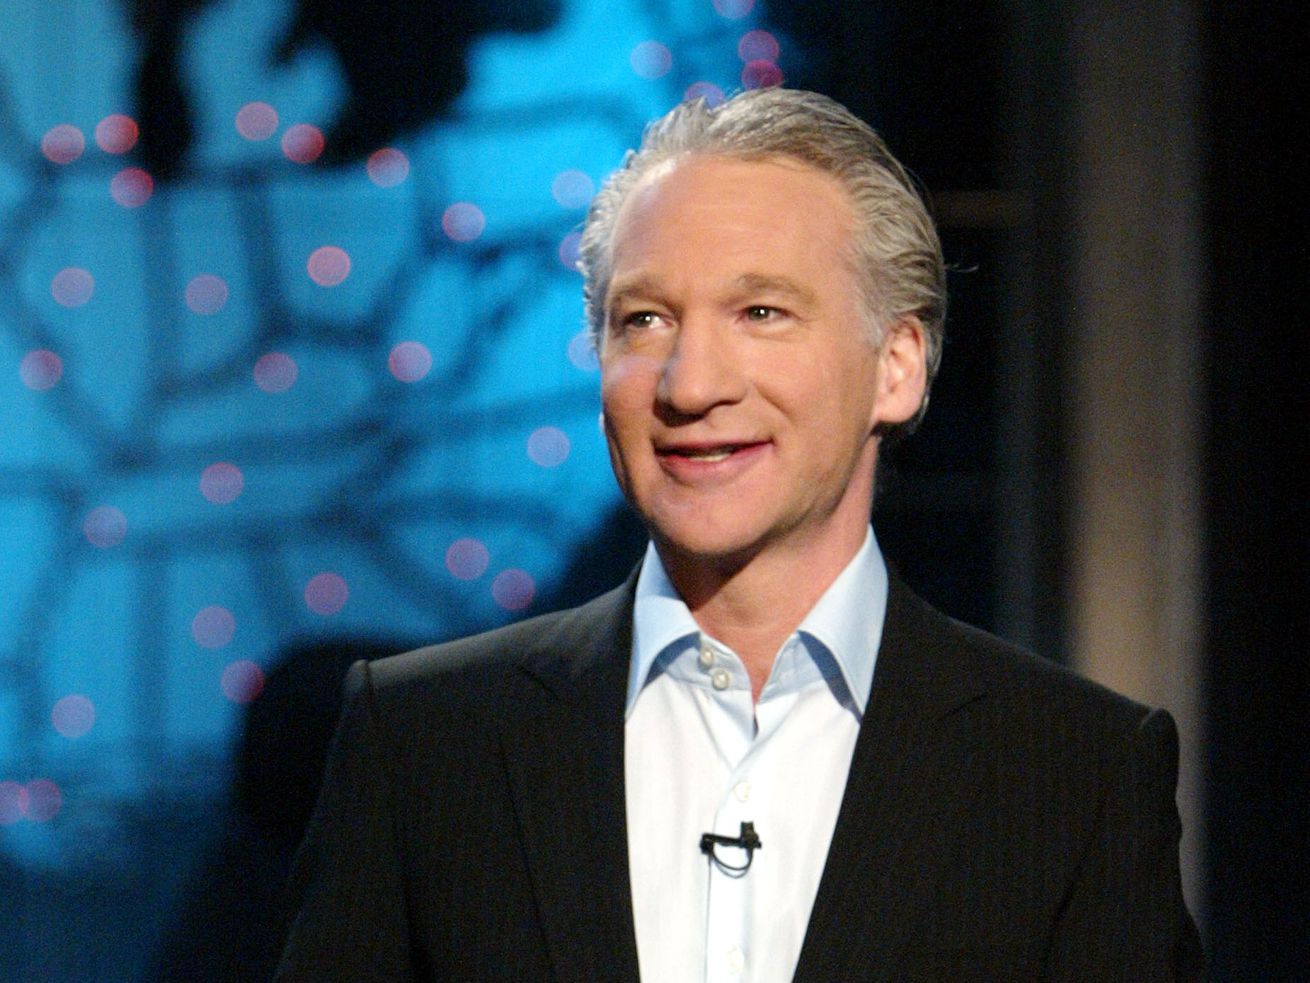 Bill Maher on free speech, comedy, and his haters